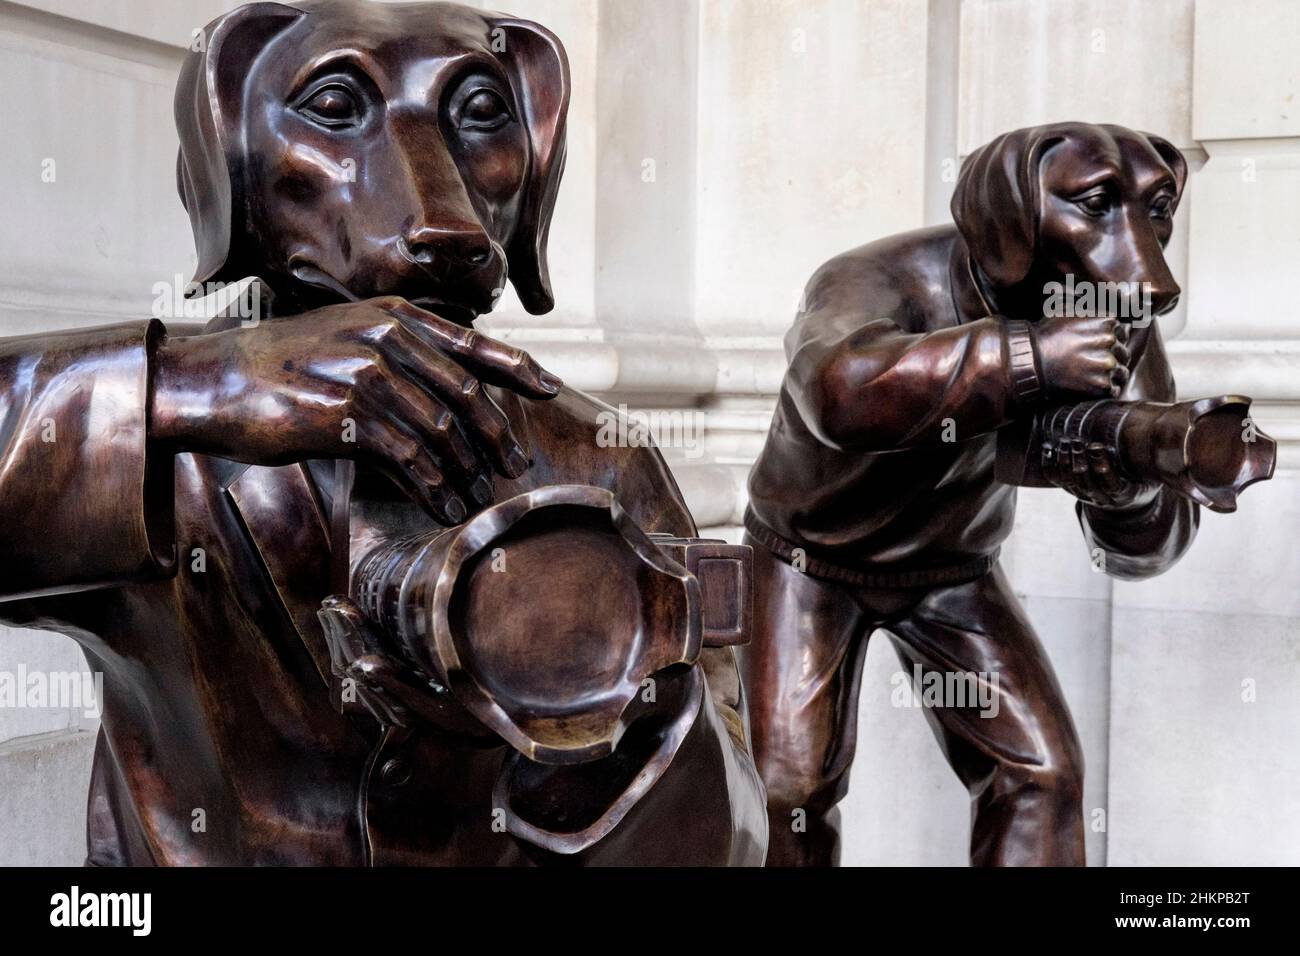 Paparazzi Dogs; bronze sculptures by New York based artistic duo Gillie and Marc on public display at the entrance to The Royal Exchange, London, UK. Stock Photo